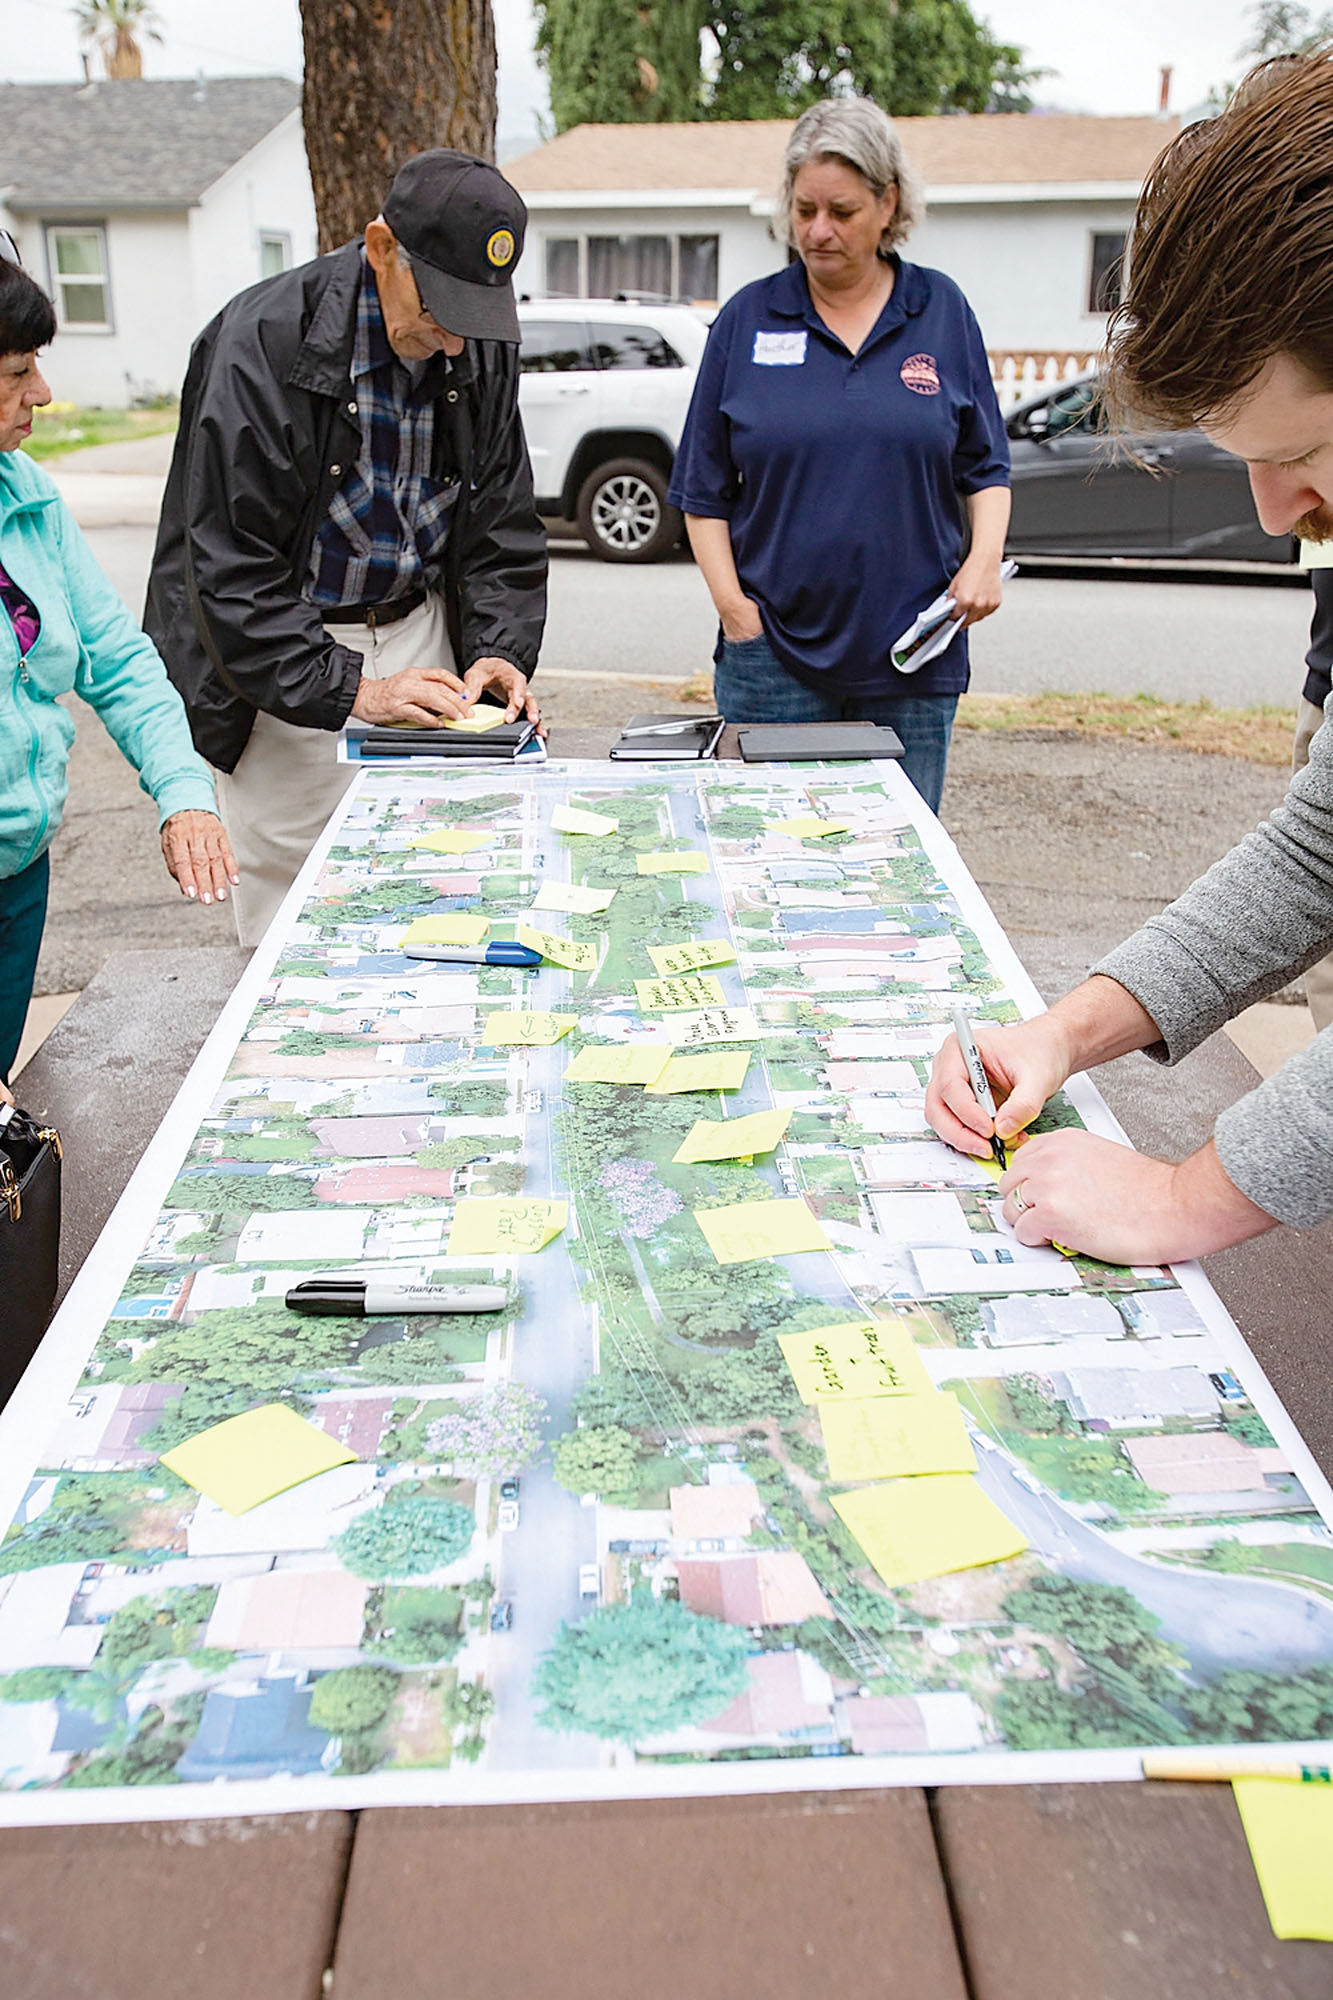 People gathered around a picnic table adding post-it notes to a large printed aerial photograph map